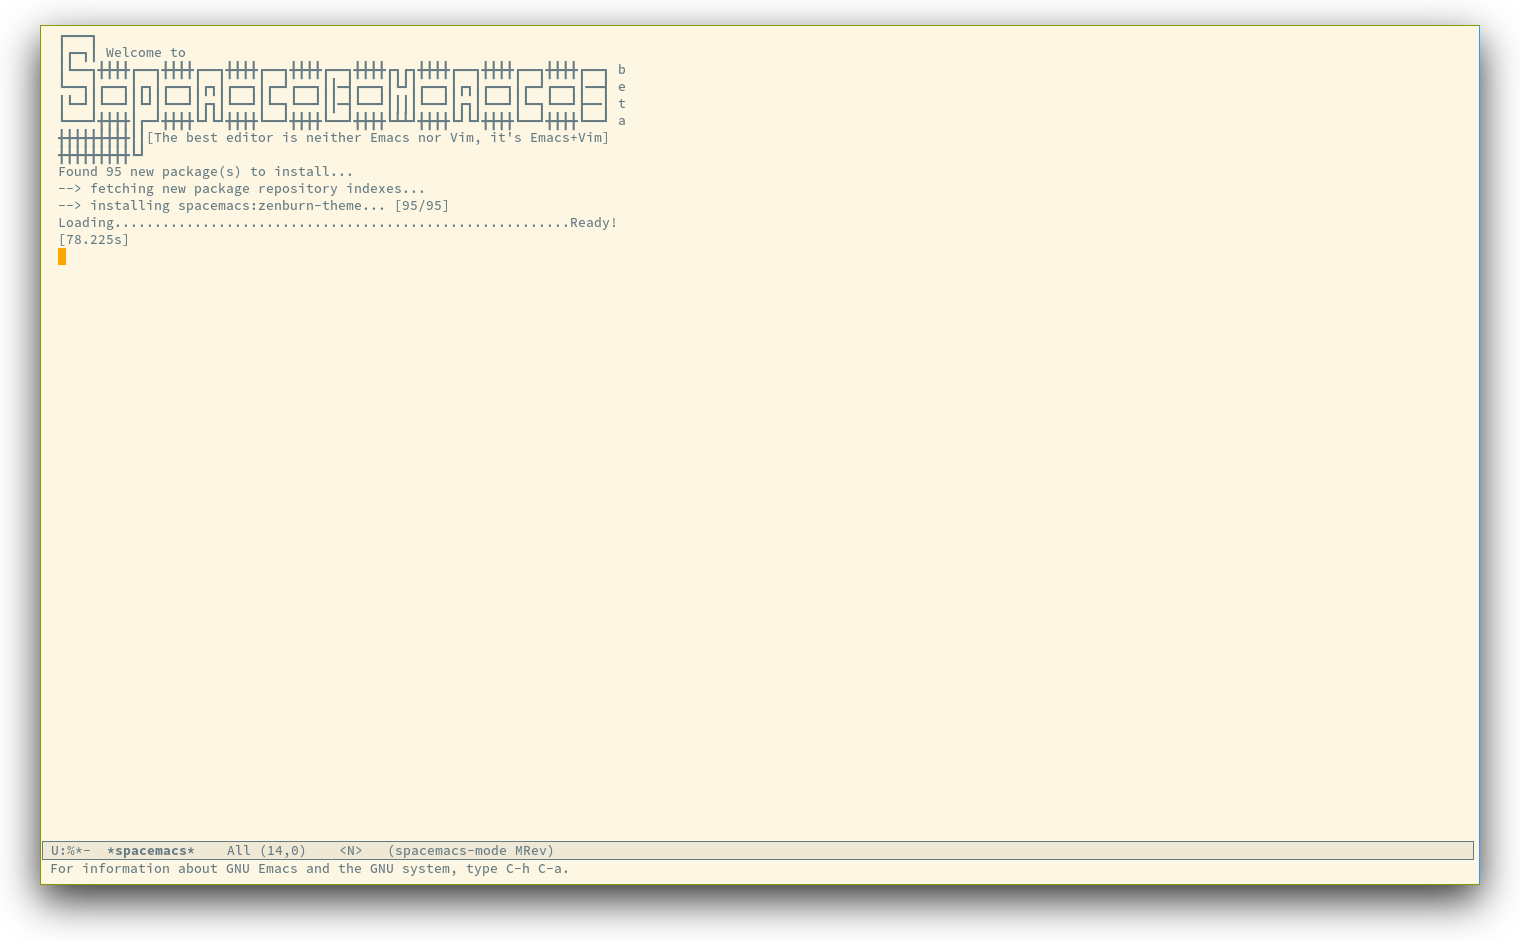 /TakeV/spacemacs/media/commit/9c7c14814102440a82af0029086c487f1053469a/doc/img/spacemacs-startup.png